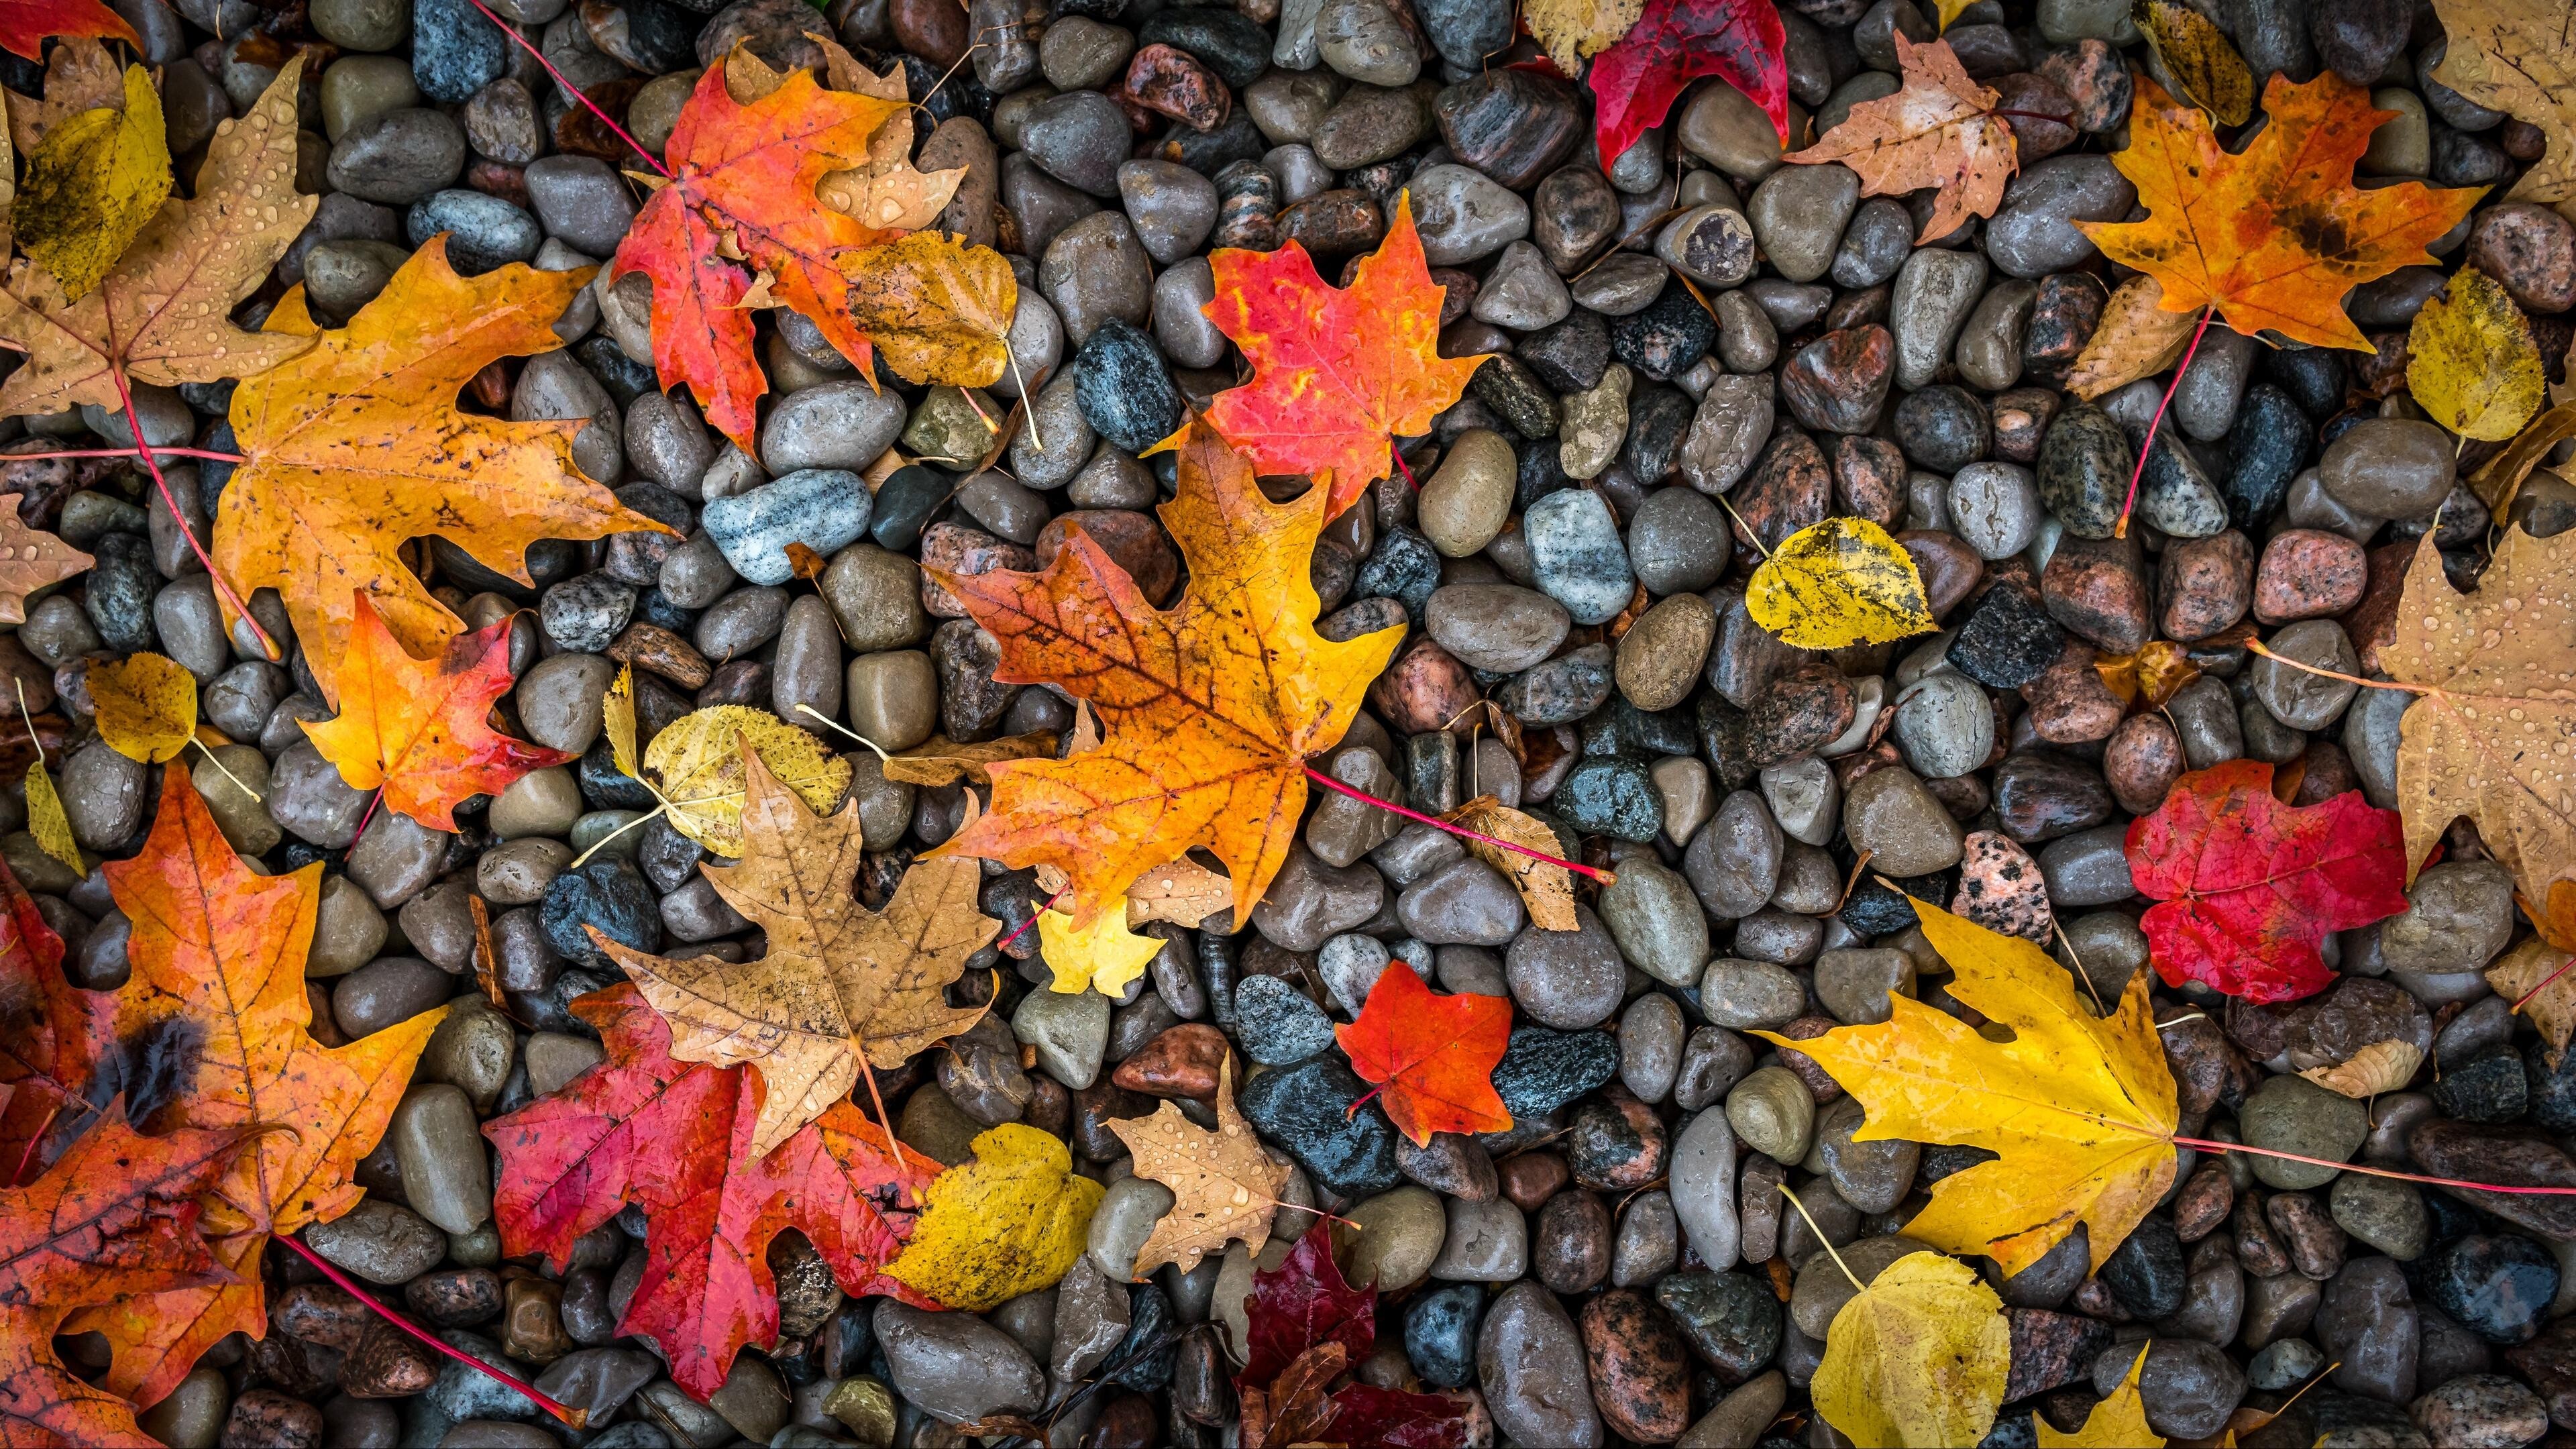 Gold Leaf: Bright multicolored maple leaves on the smooth stones, Trees shedding their foliage. 3840x2160 4K Wallpaper.